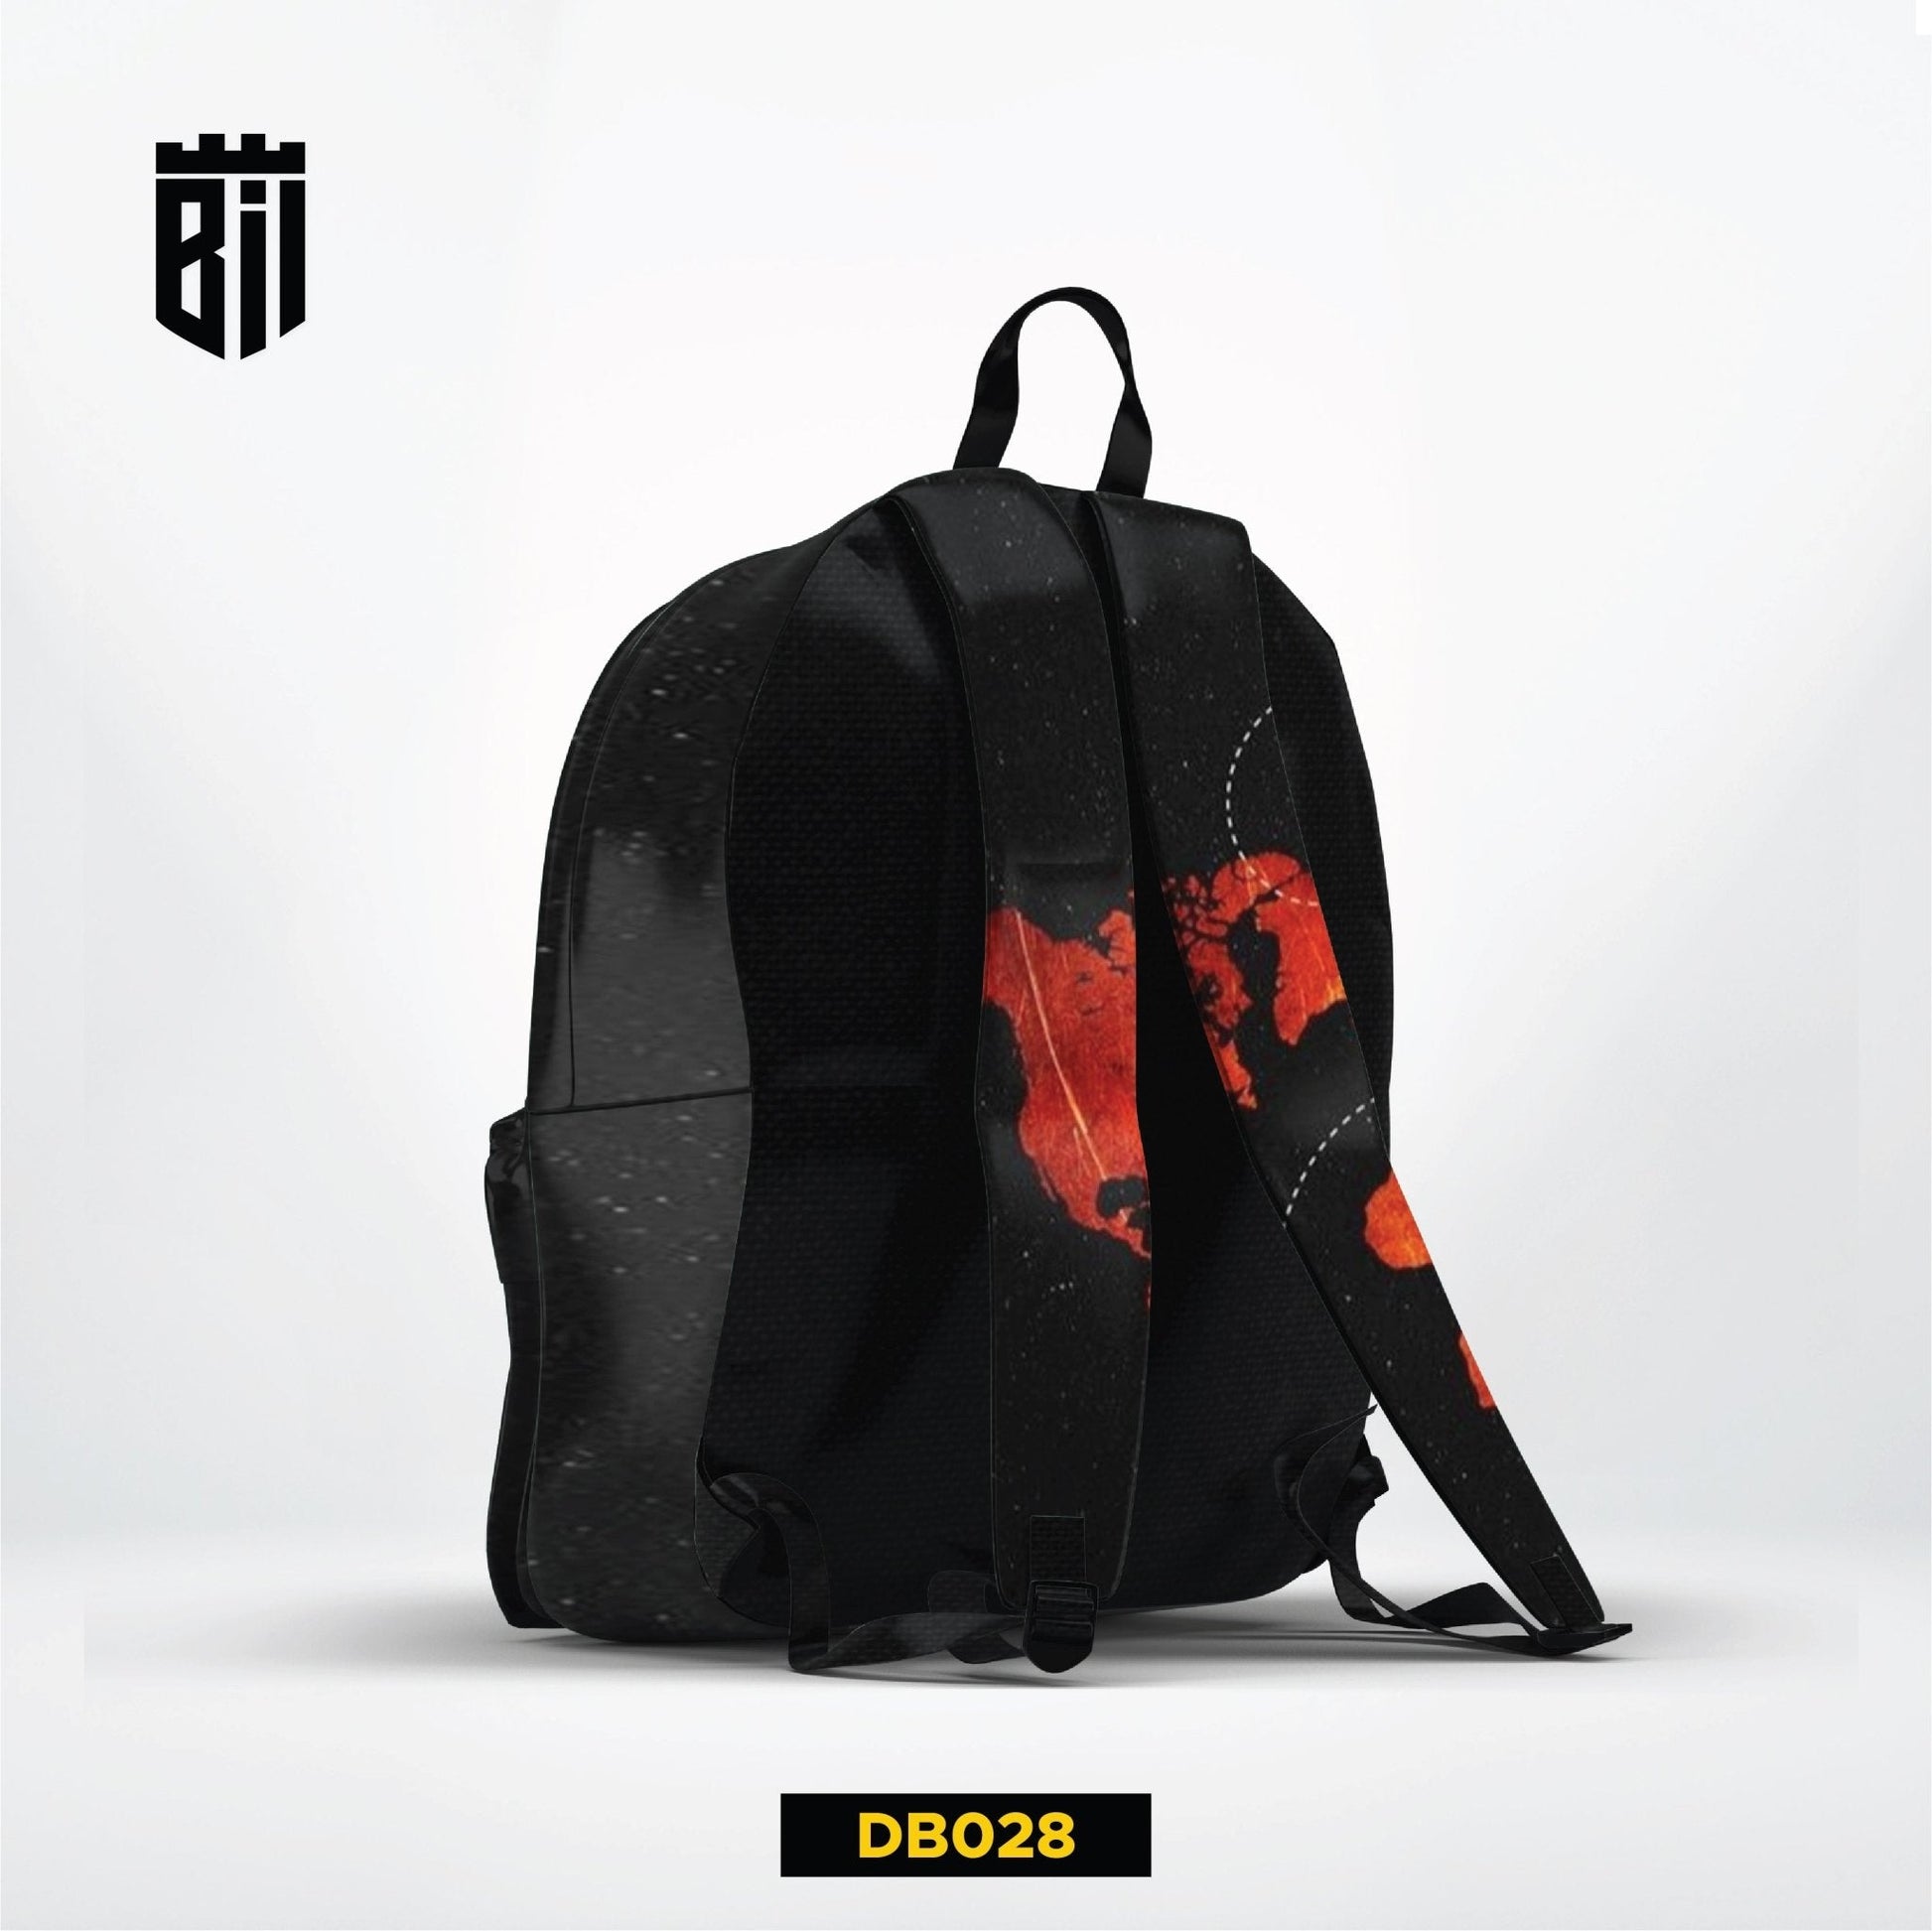 DB028 Adventure Travel Allover Printed Backpack - BREACHIT